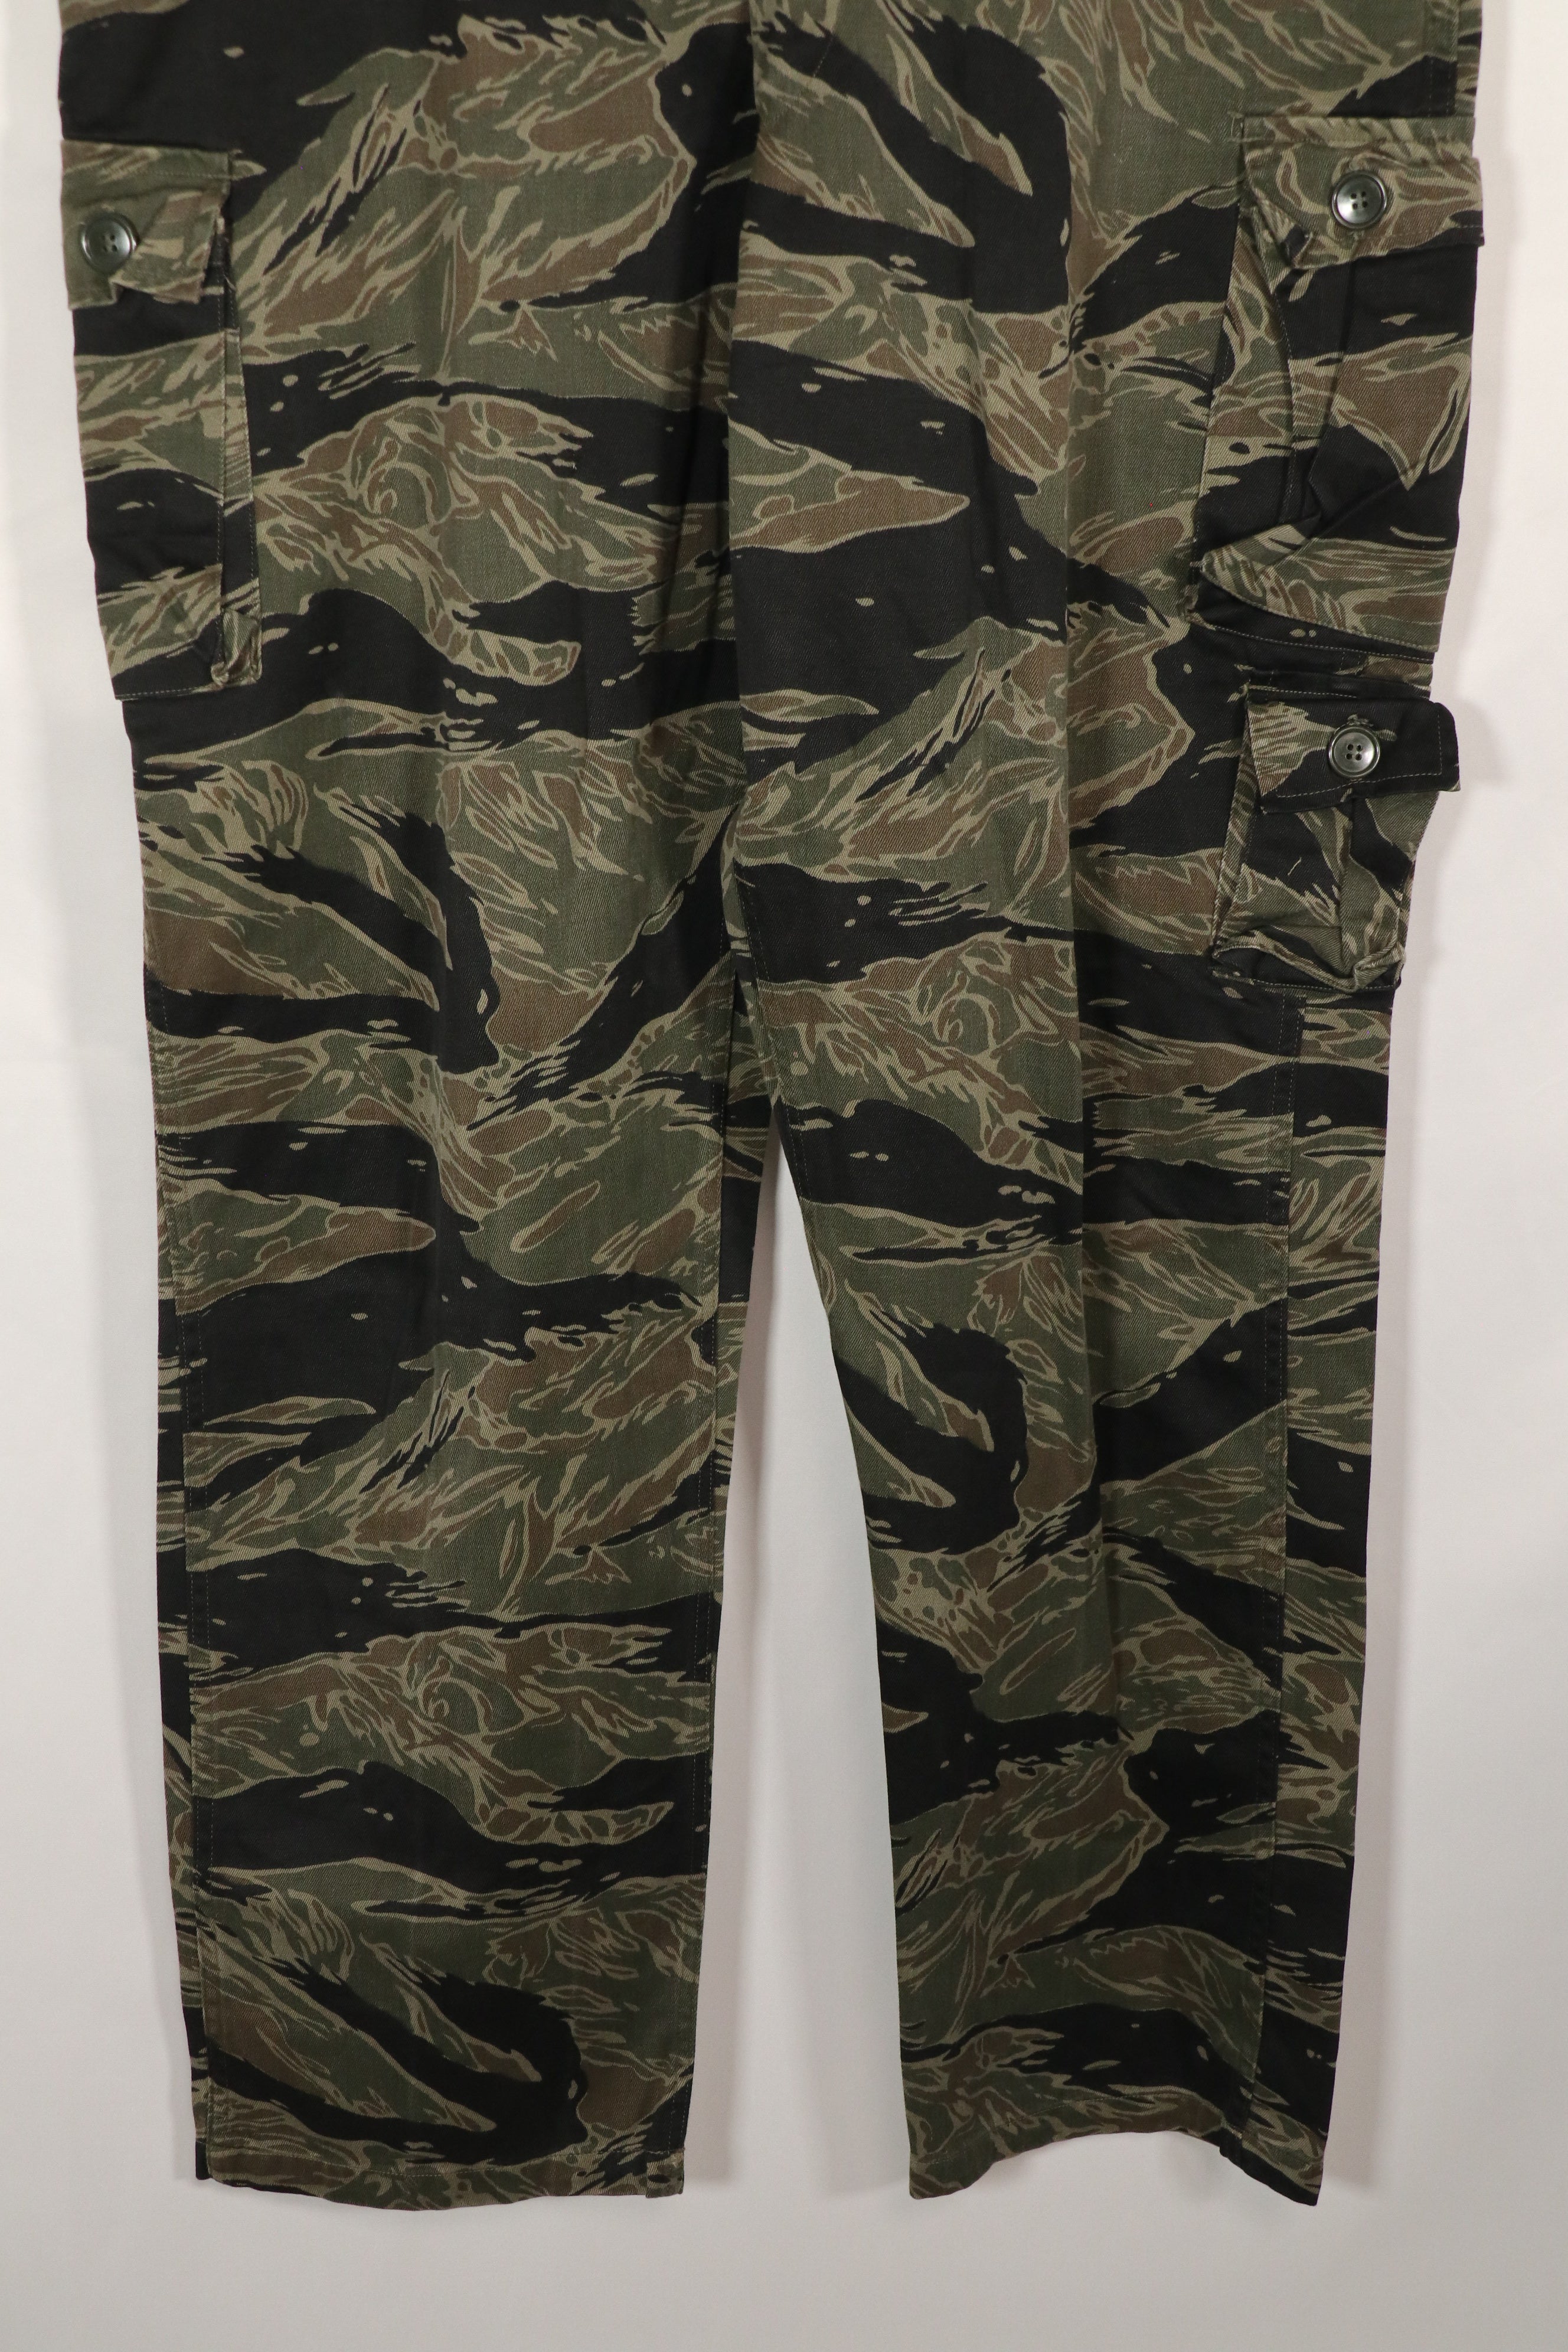 Real US cut silver tiger stripe US-M pants, little fading, good condition.